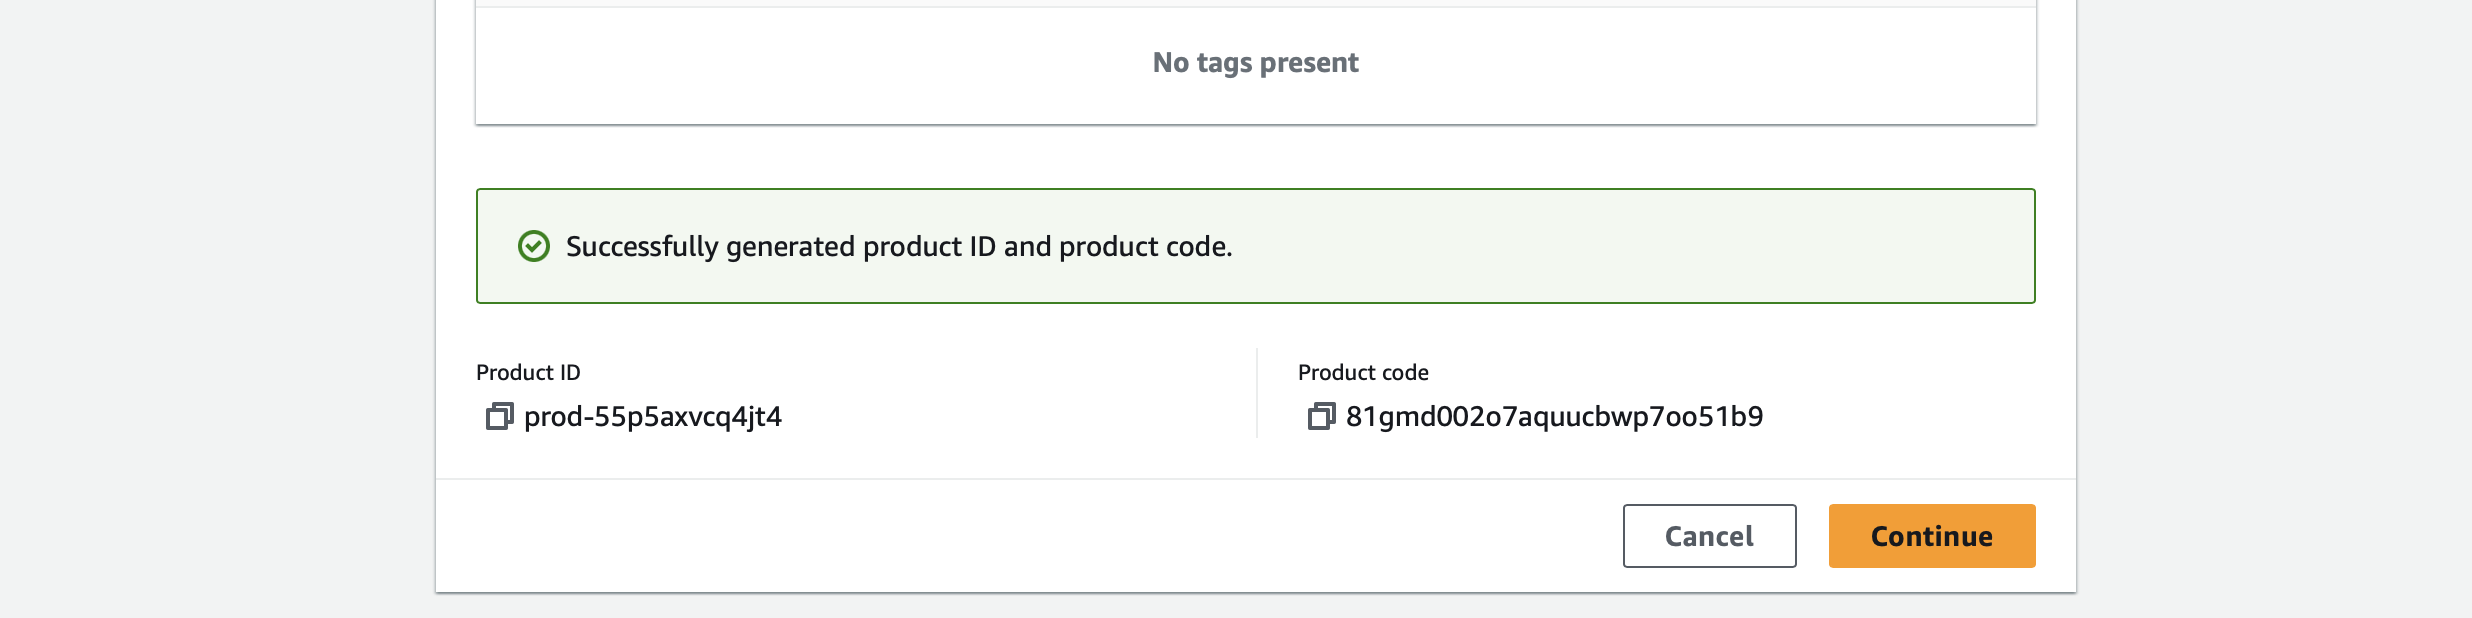 Generated product ID and code